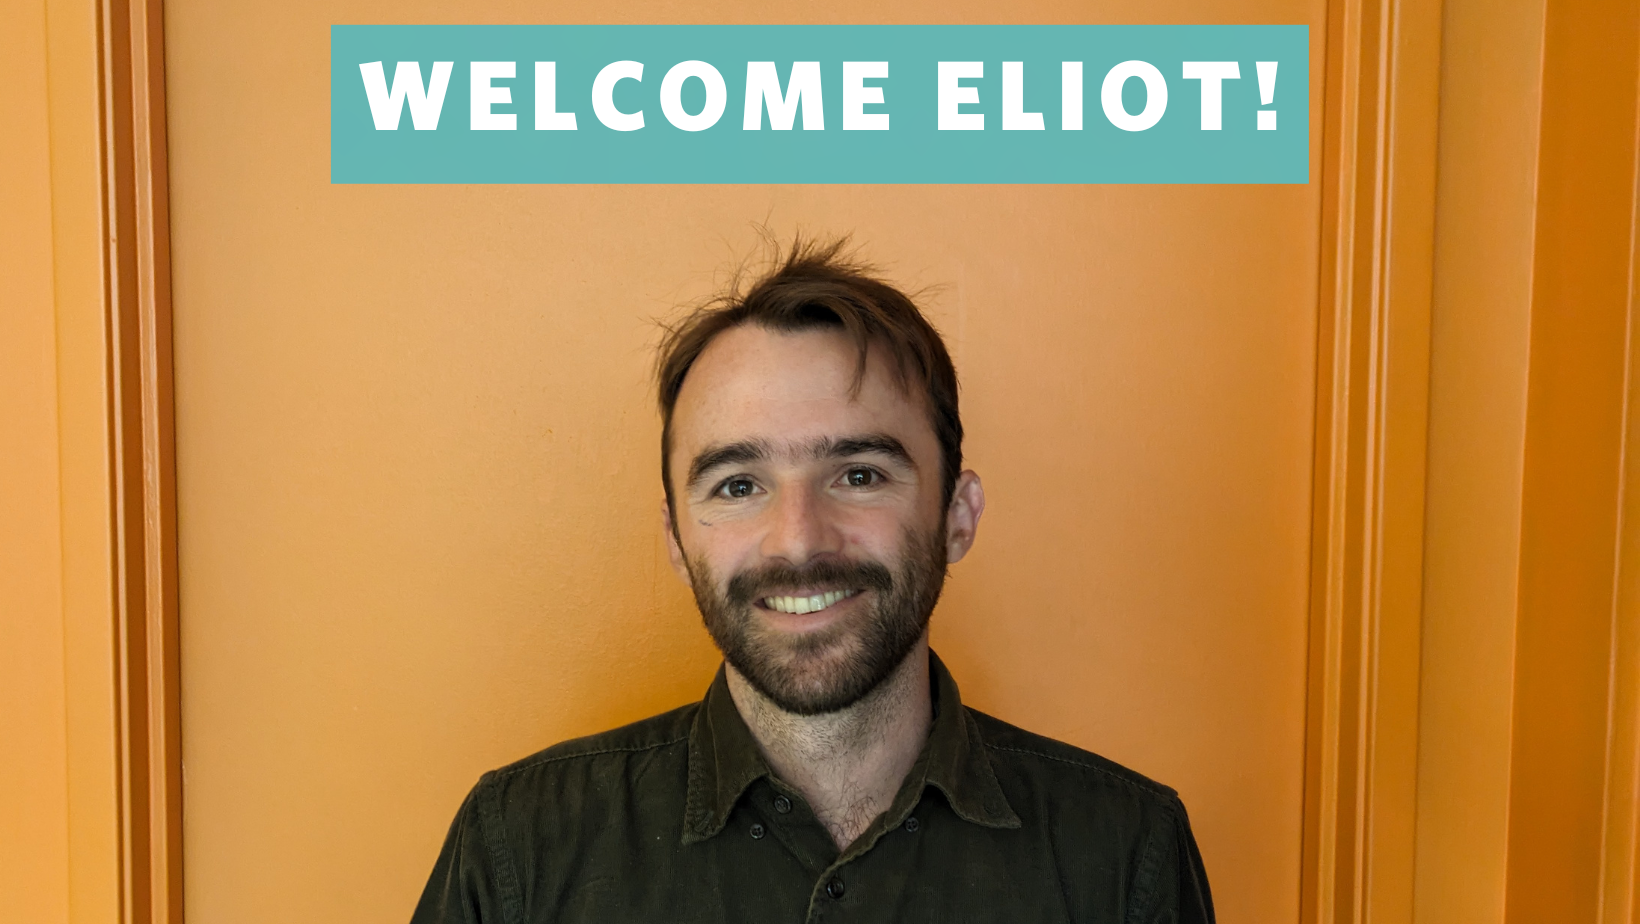 A photo of Eliot (man, short dark brown hair, fark green shirt) smiling at the camera in front of orange wall with words "Meet Eliot" overlaying the image.